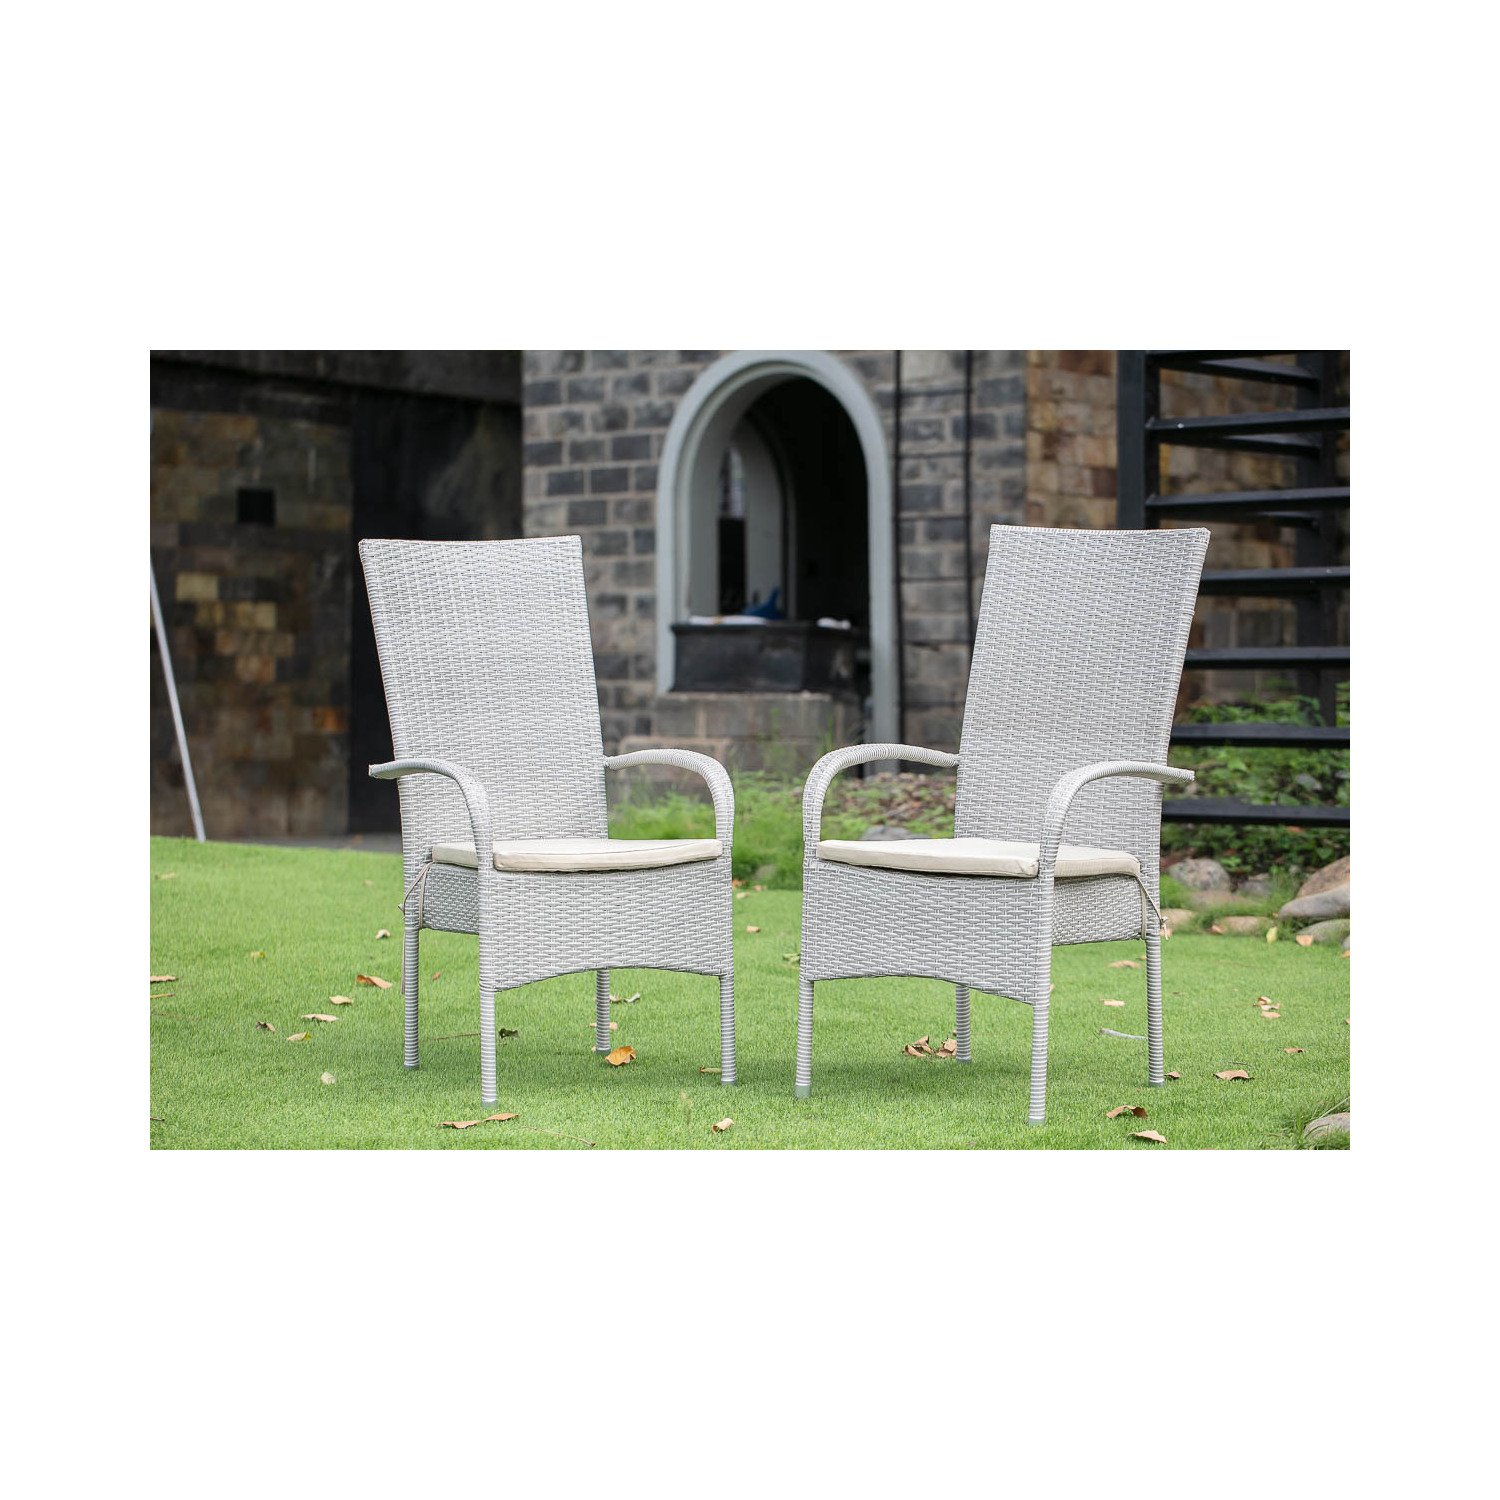 Set of 2 Chairs OSLC103A OSLO PATIO CHAIR WITH CUSHION, NATURAL LINEN WICKER, AND BEIGE CUSHION - image 1 of 3